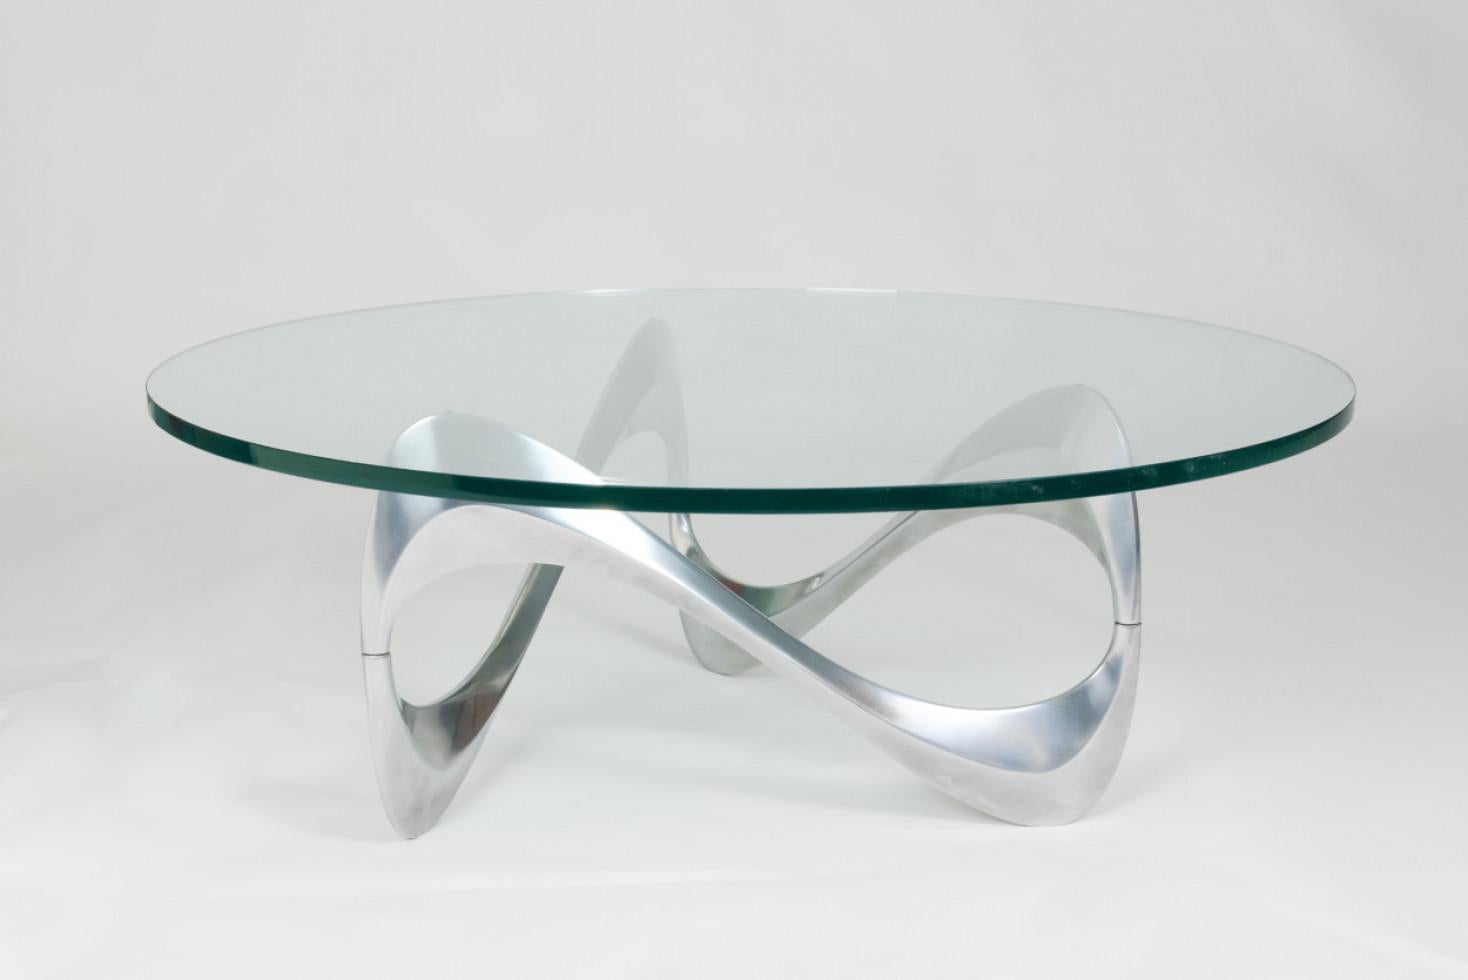 Glass Sculptural Chrome Coffee or Side Table by Knut Hesterberg, 1960 For Sale